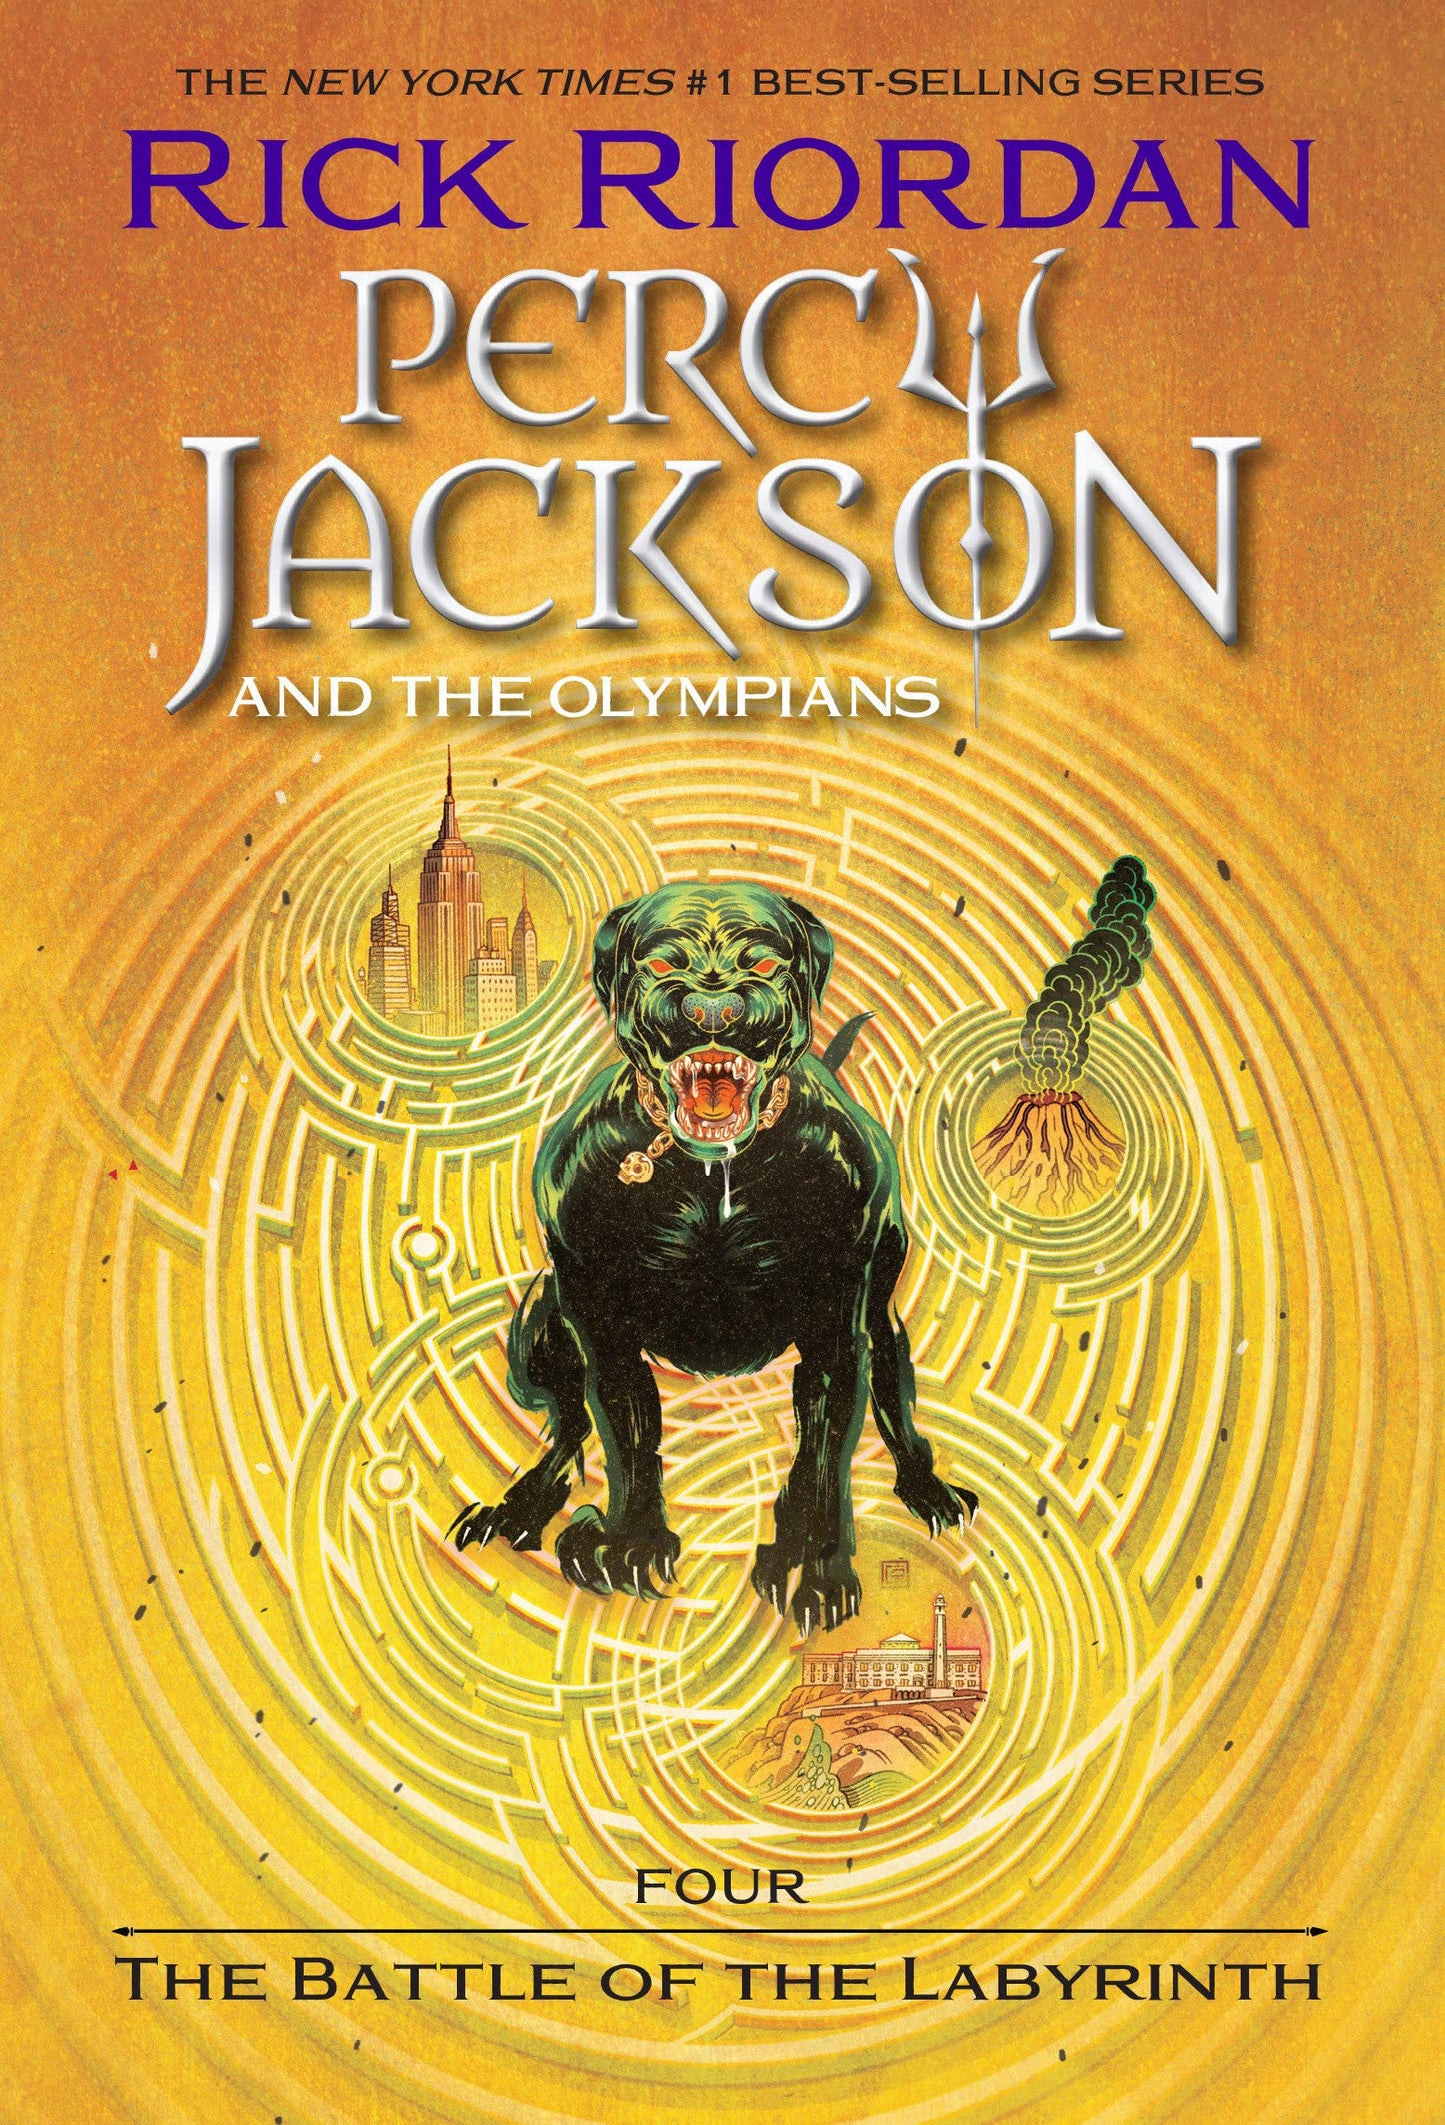 PERCY JACKSON: THE BATTLE OF THE LABYRINTH #4